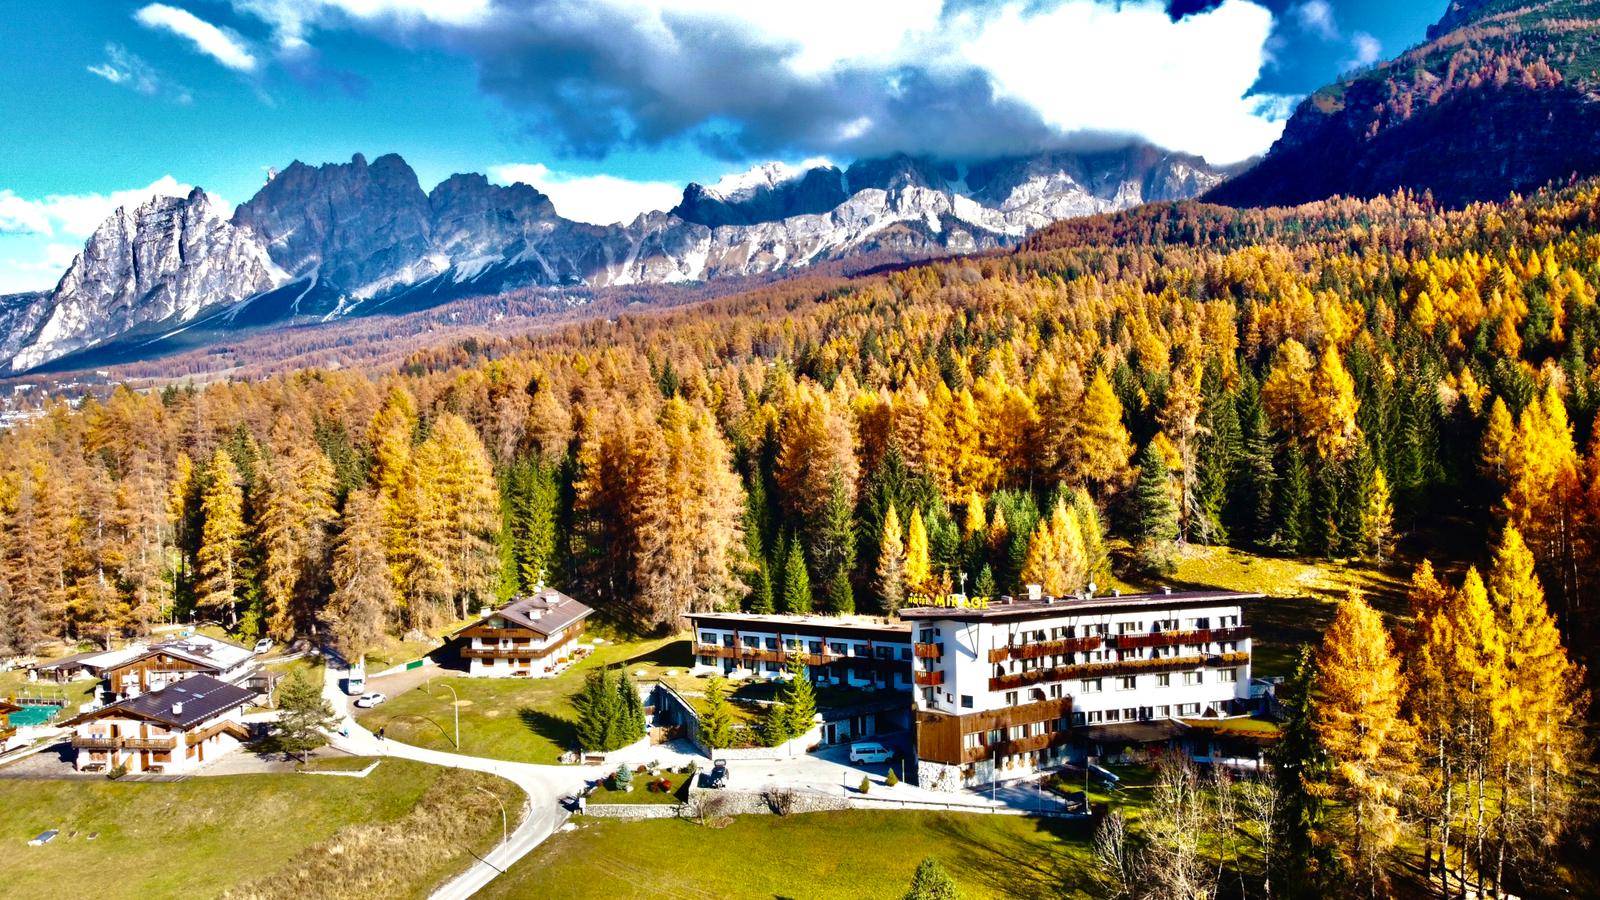 Amazing Hotel in Cortina, the Aspen of Italy, where the Winter Olympics of 2026 will take place!